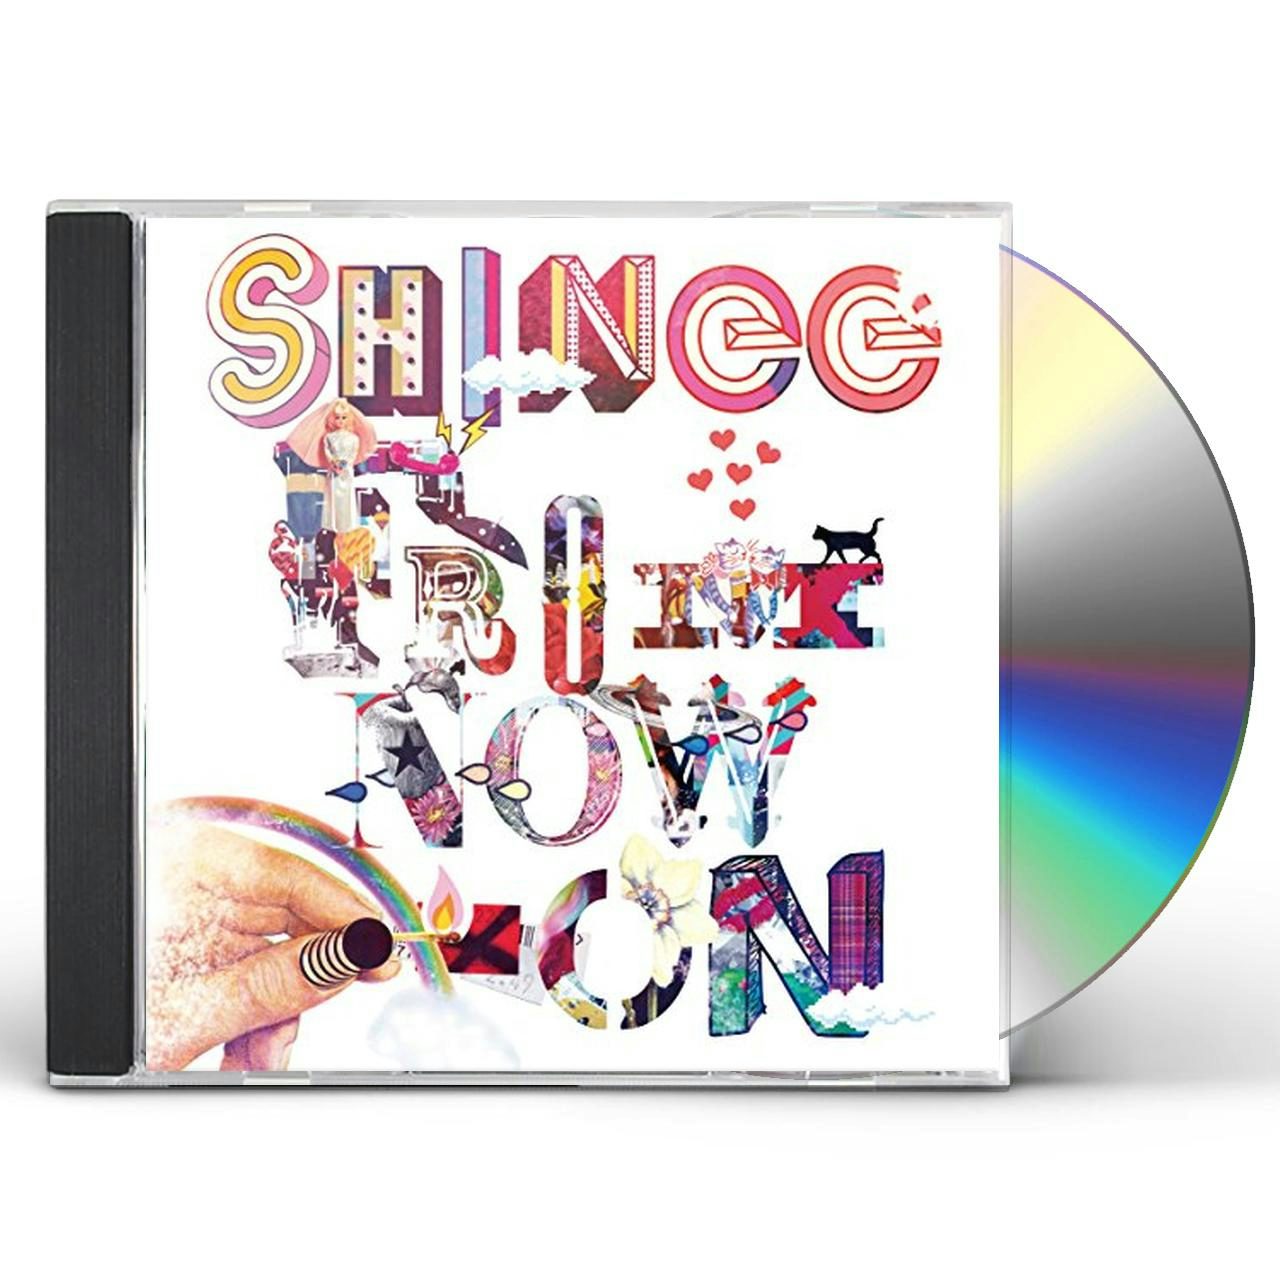 SHINee BEST FROM NOW ON CD $35.99$32.49